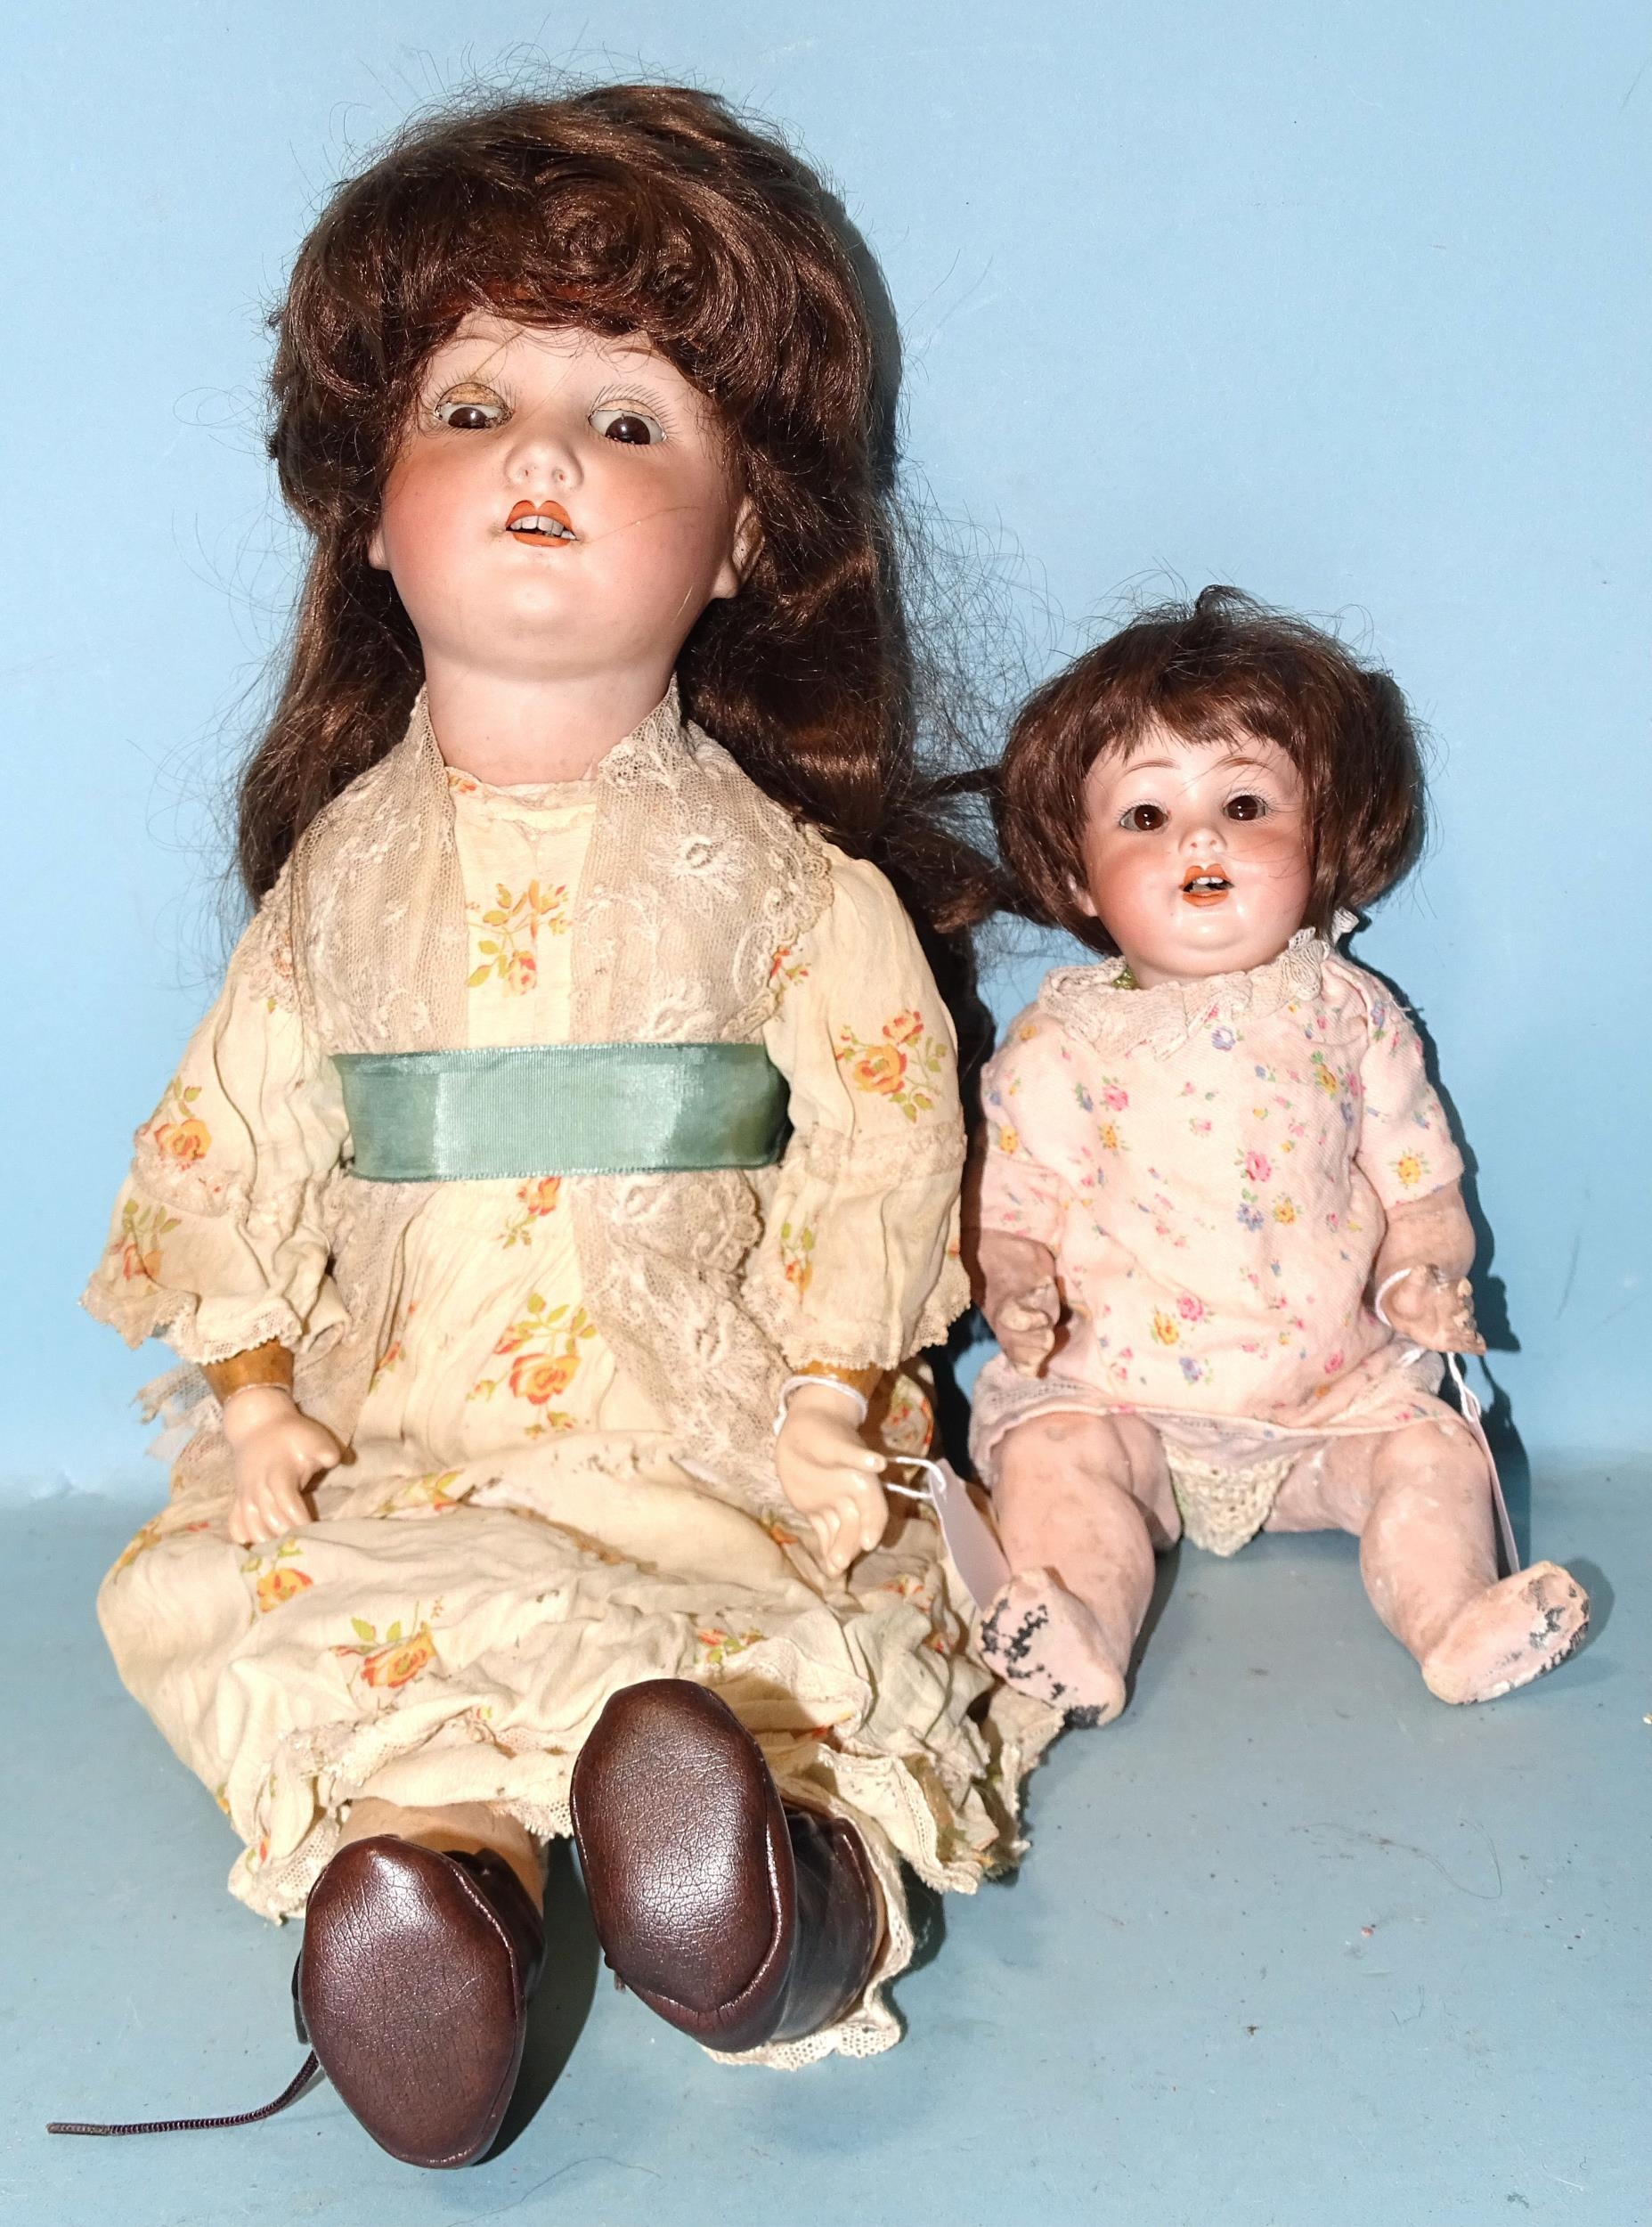 A Porzellanfabrik Mengersgereuth bisque head doll, marked PM 914 Germany 1, with sleeping brown